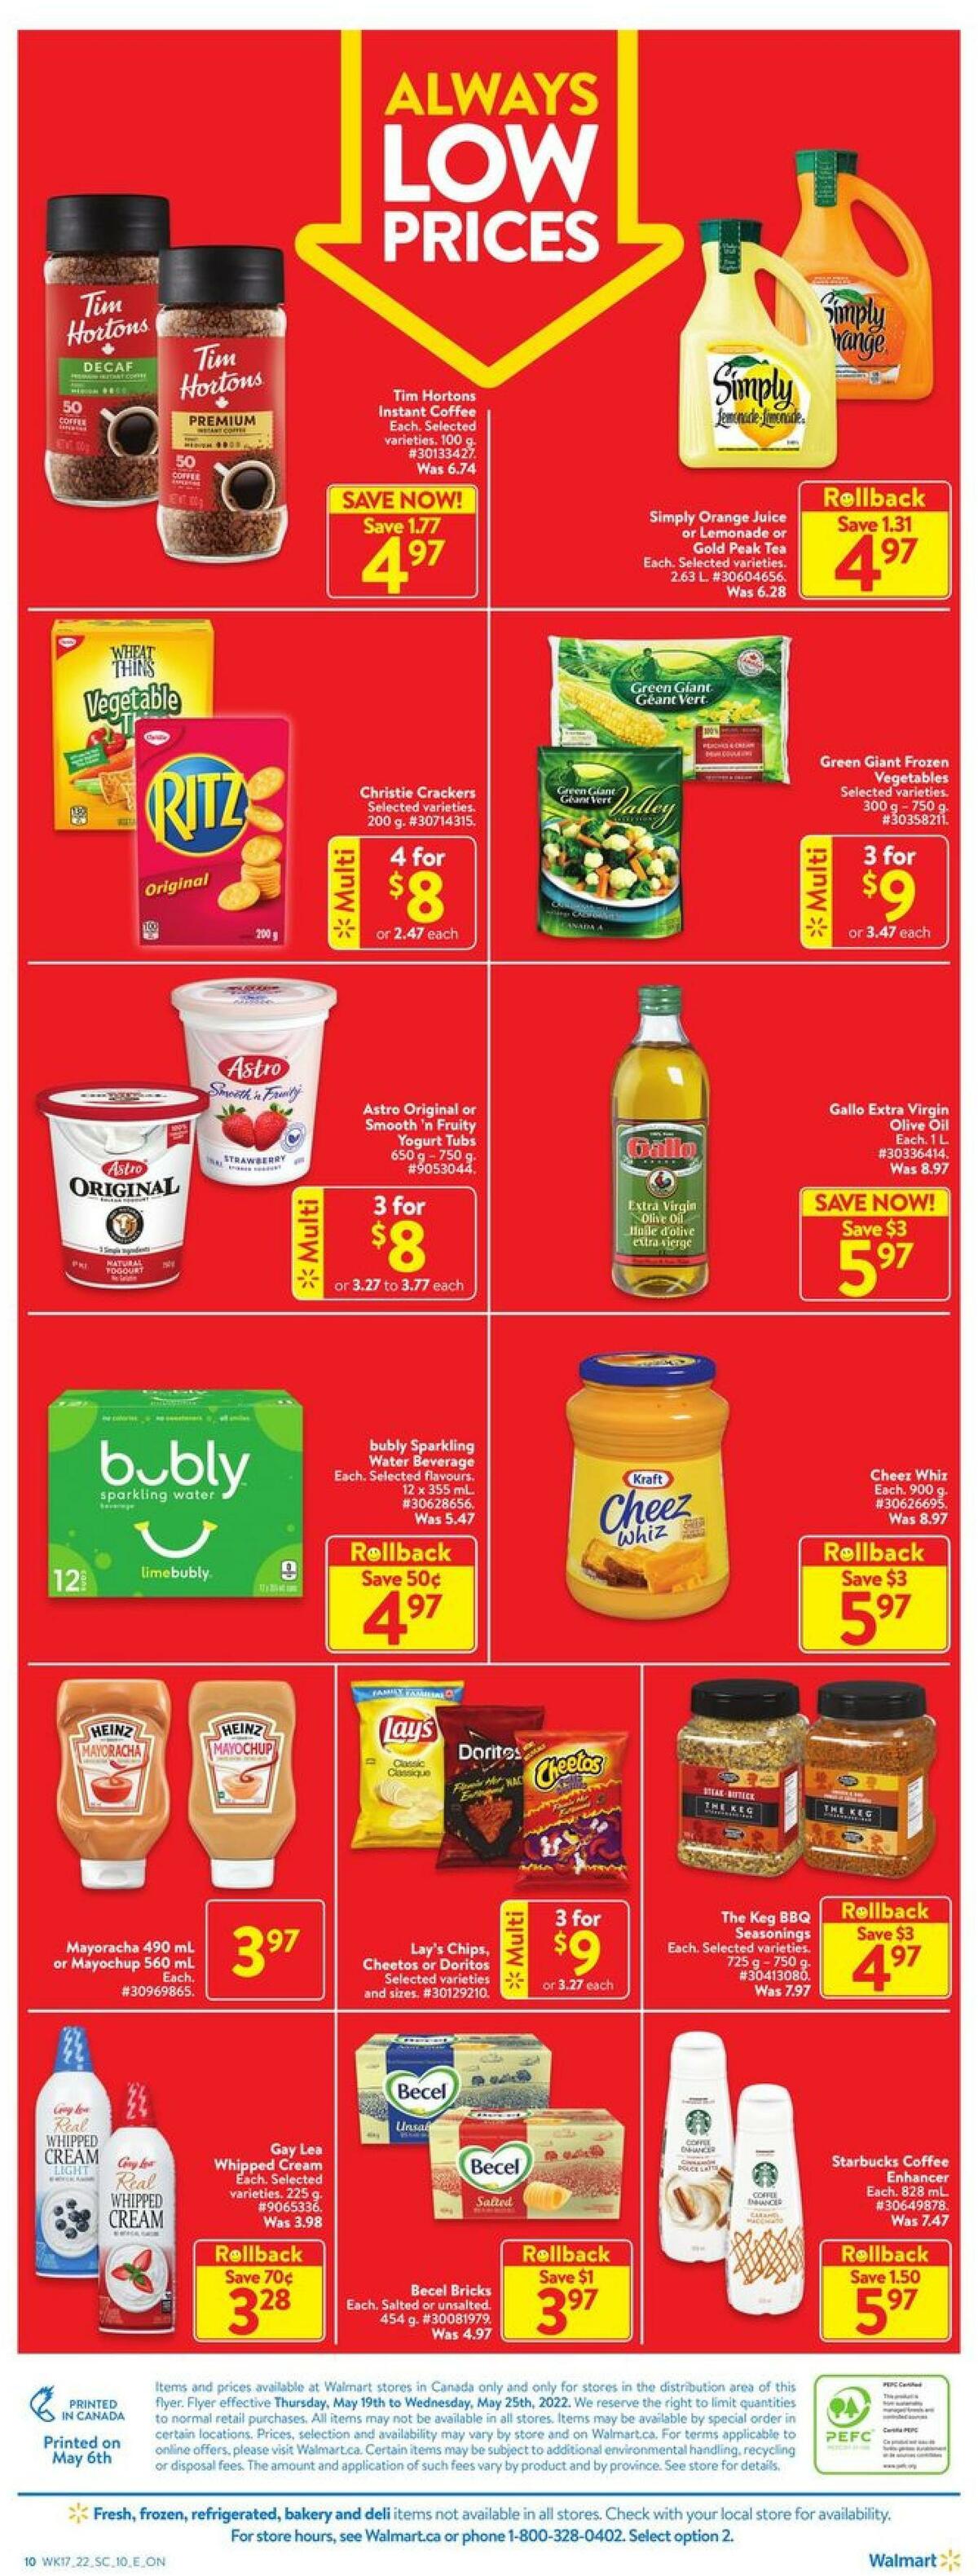 Walmart Flyer from May 19